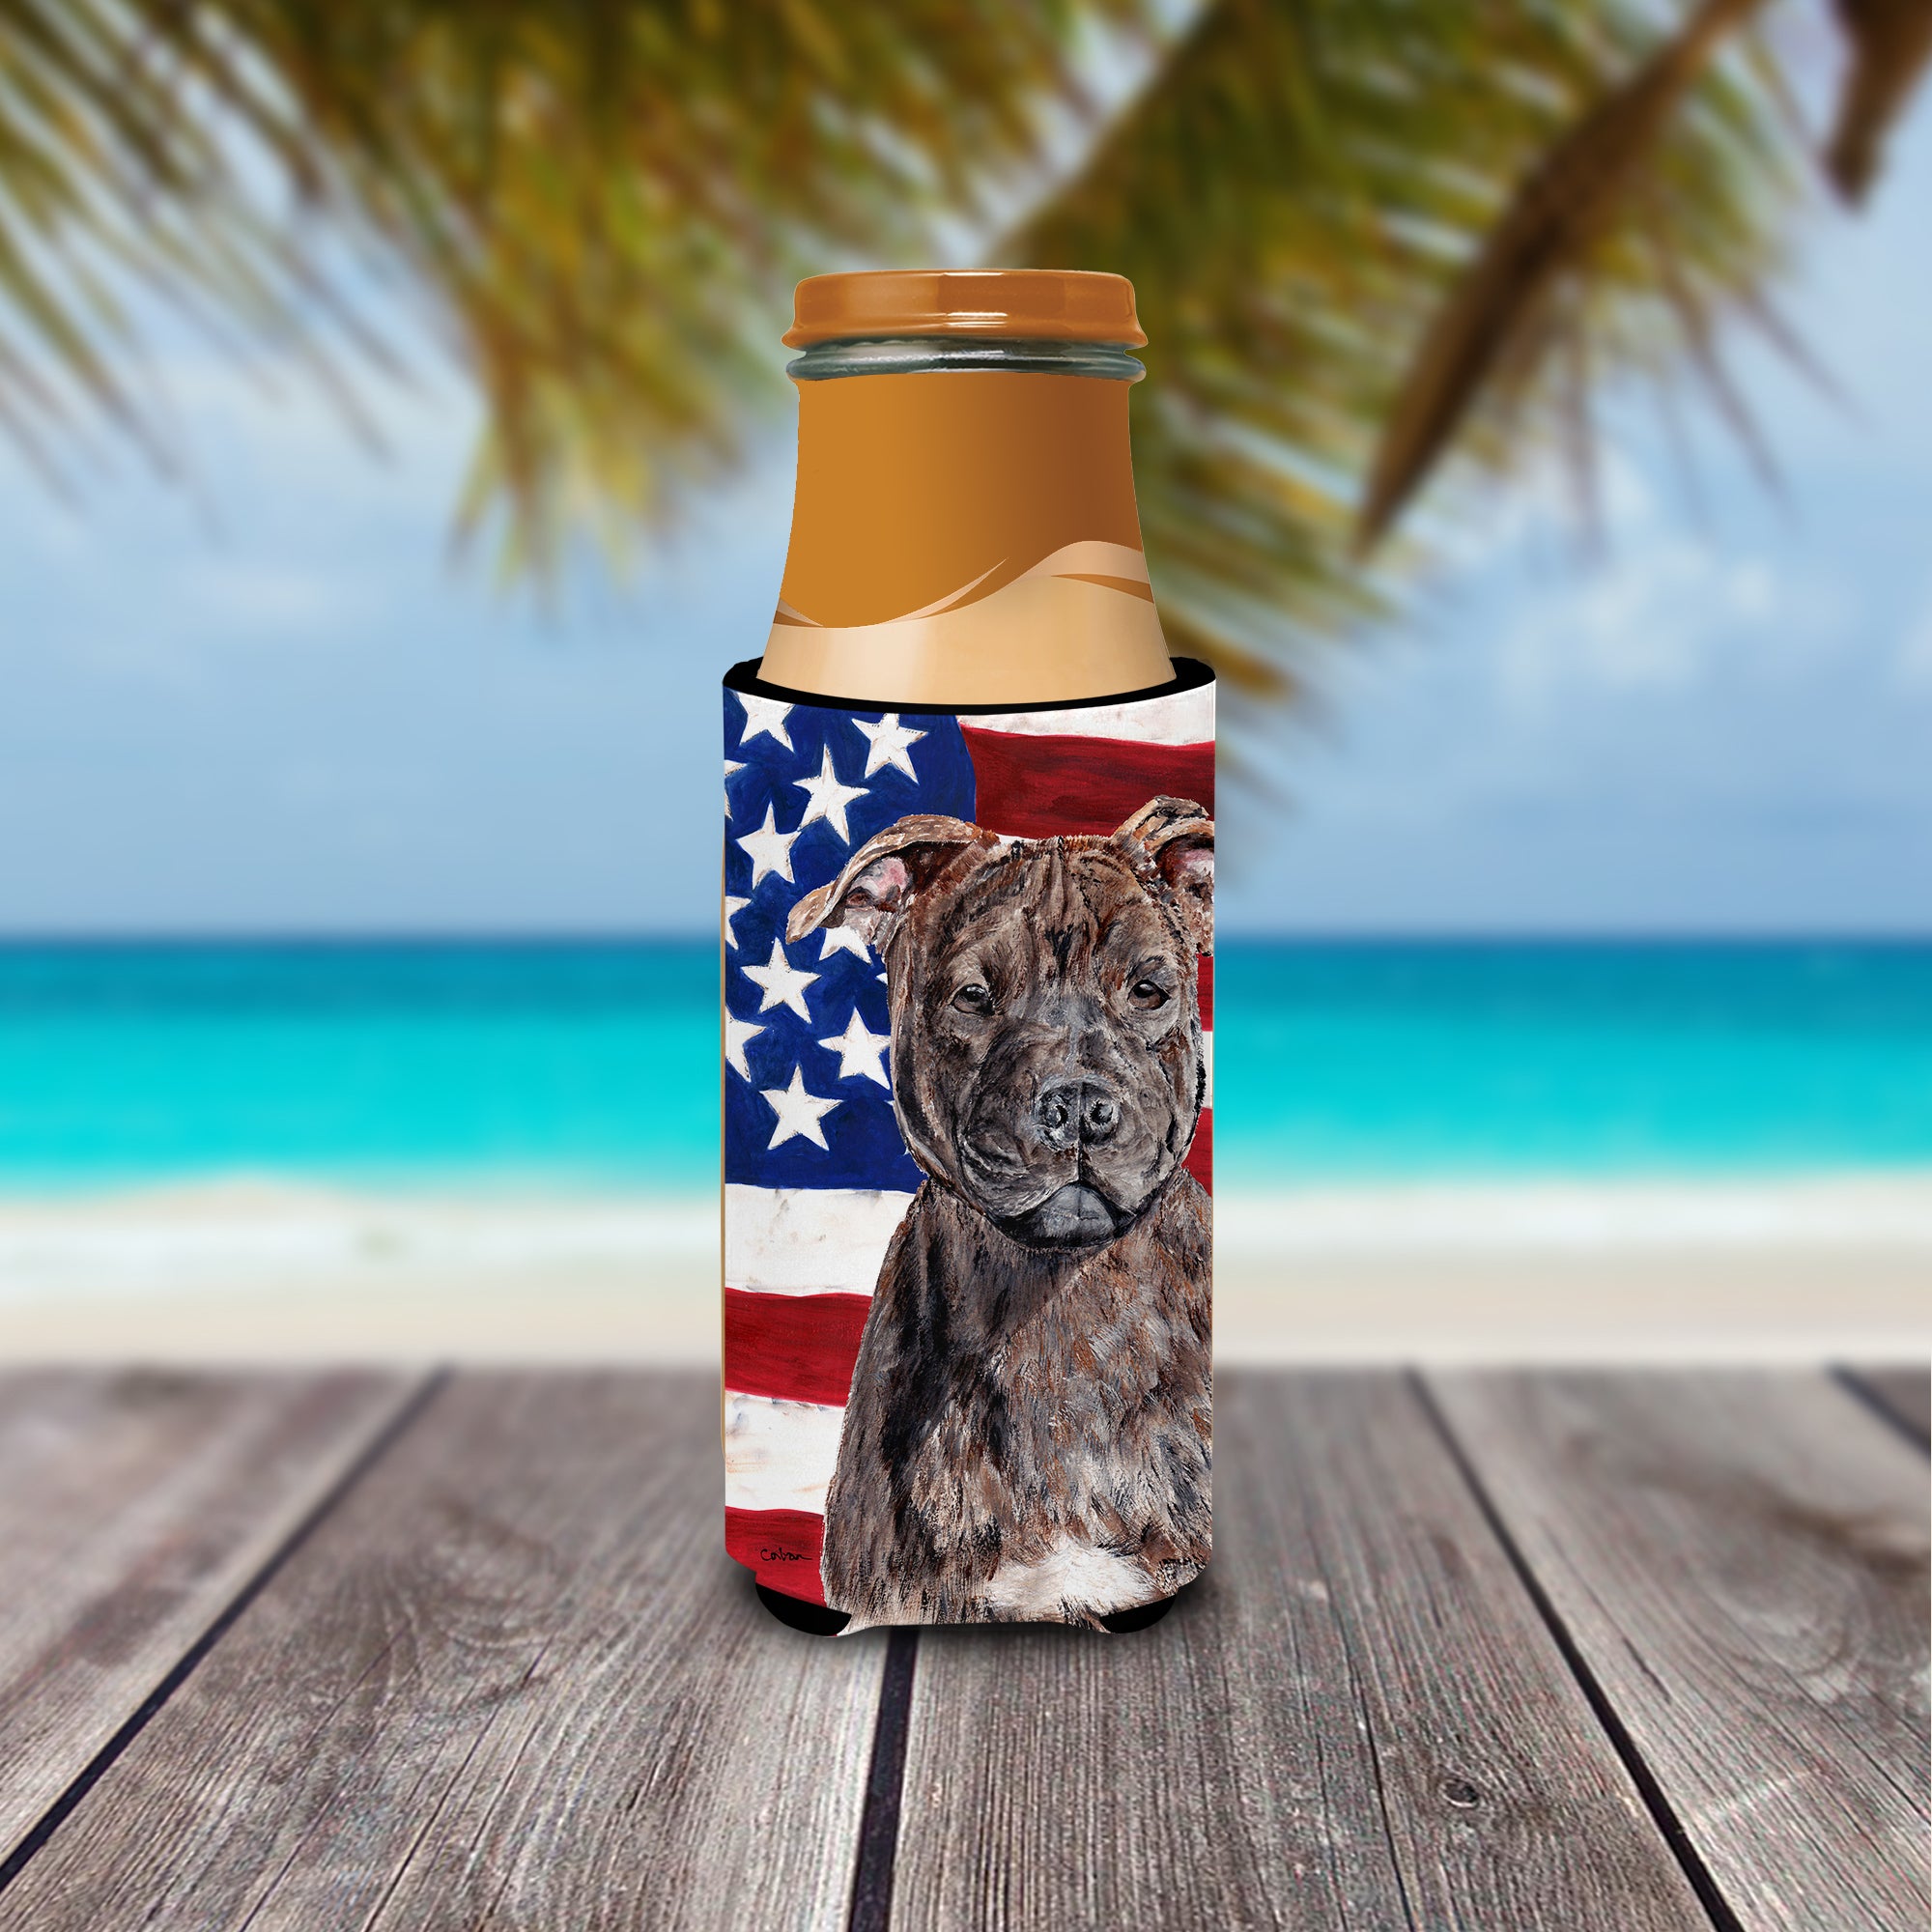 Staffordshire Bull Terrier Staffie with American Flag USA Ultra Beverage Insulators for slim cans SC9633MUK.